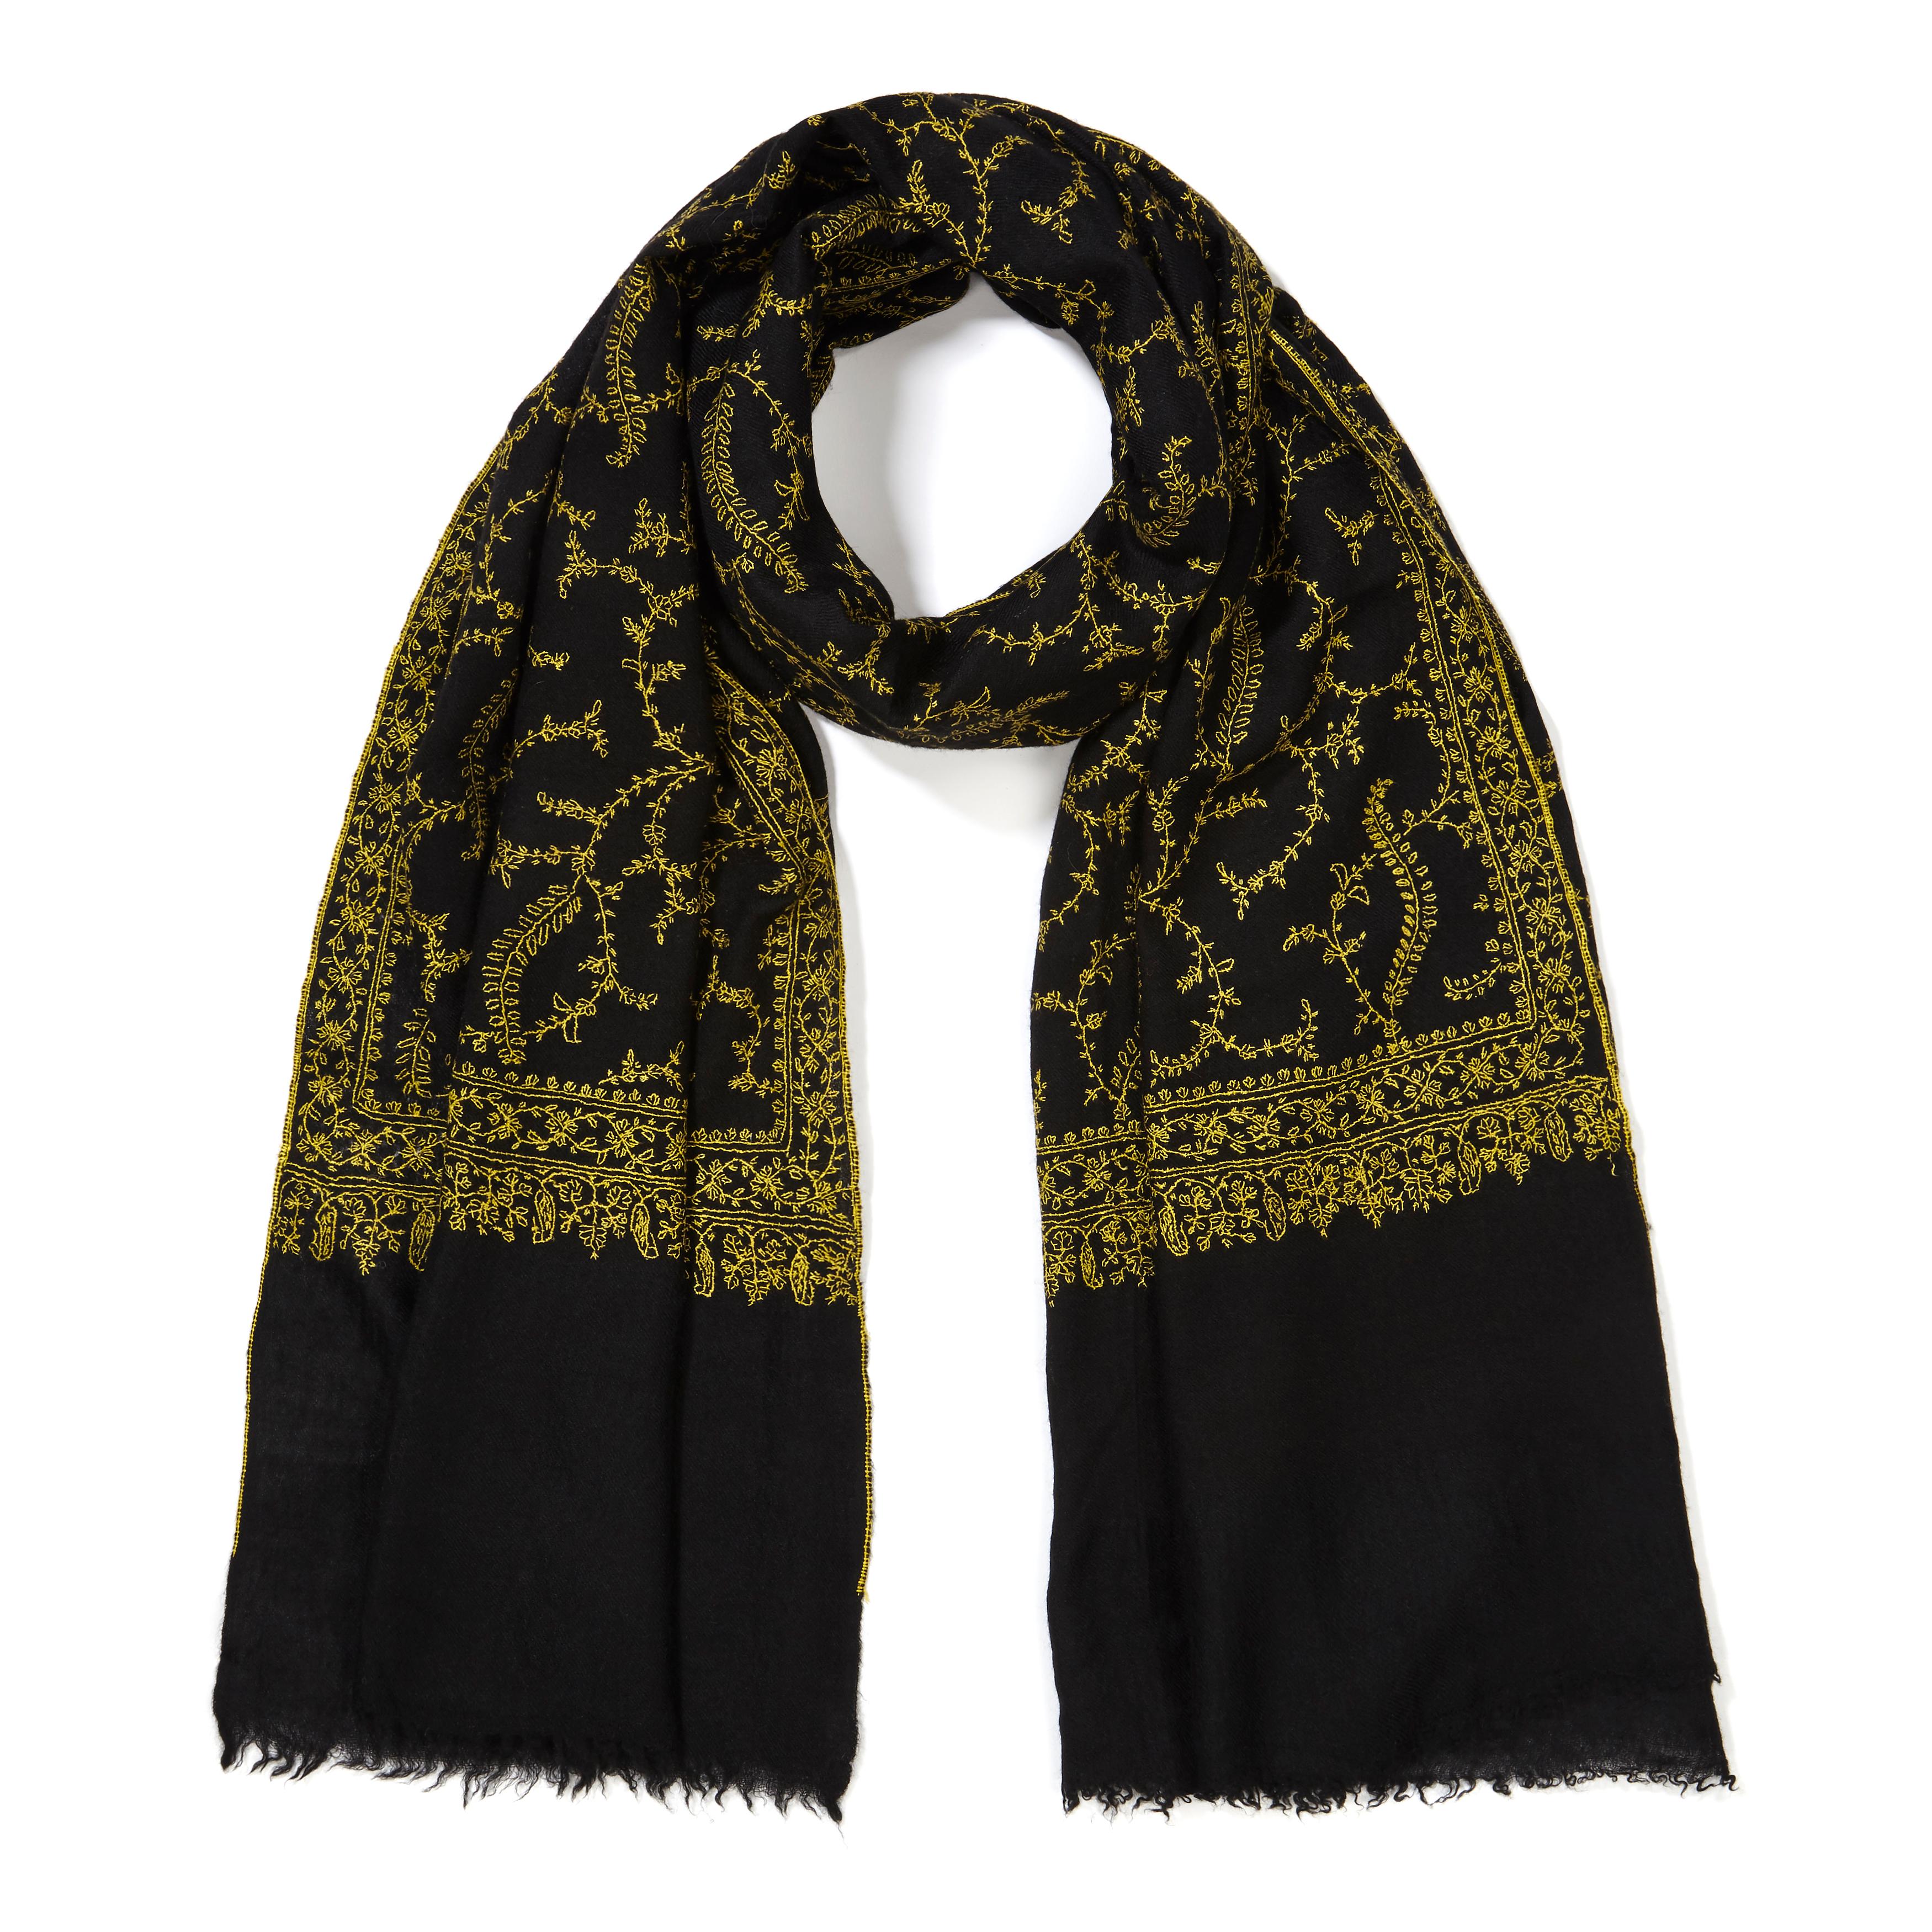 Women's or Men's Limited Edition Hand Embroidered Black & Yellow 100% Cashmere Shawl - Gift 